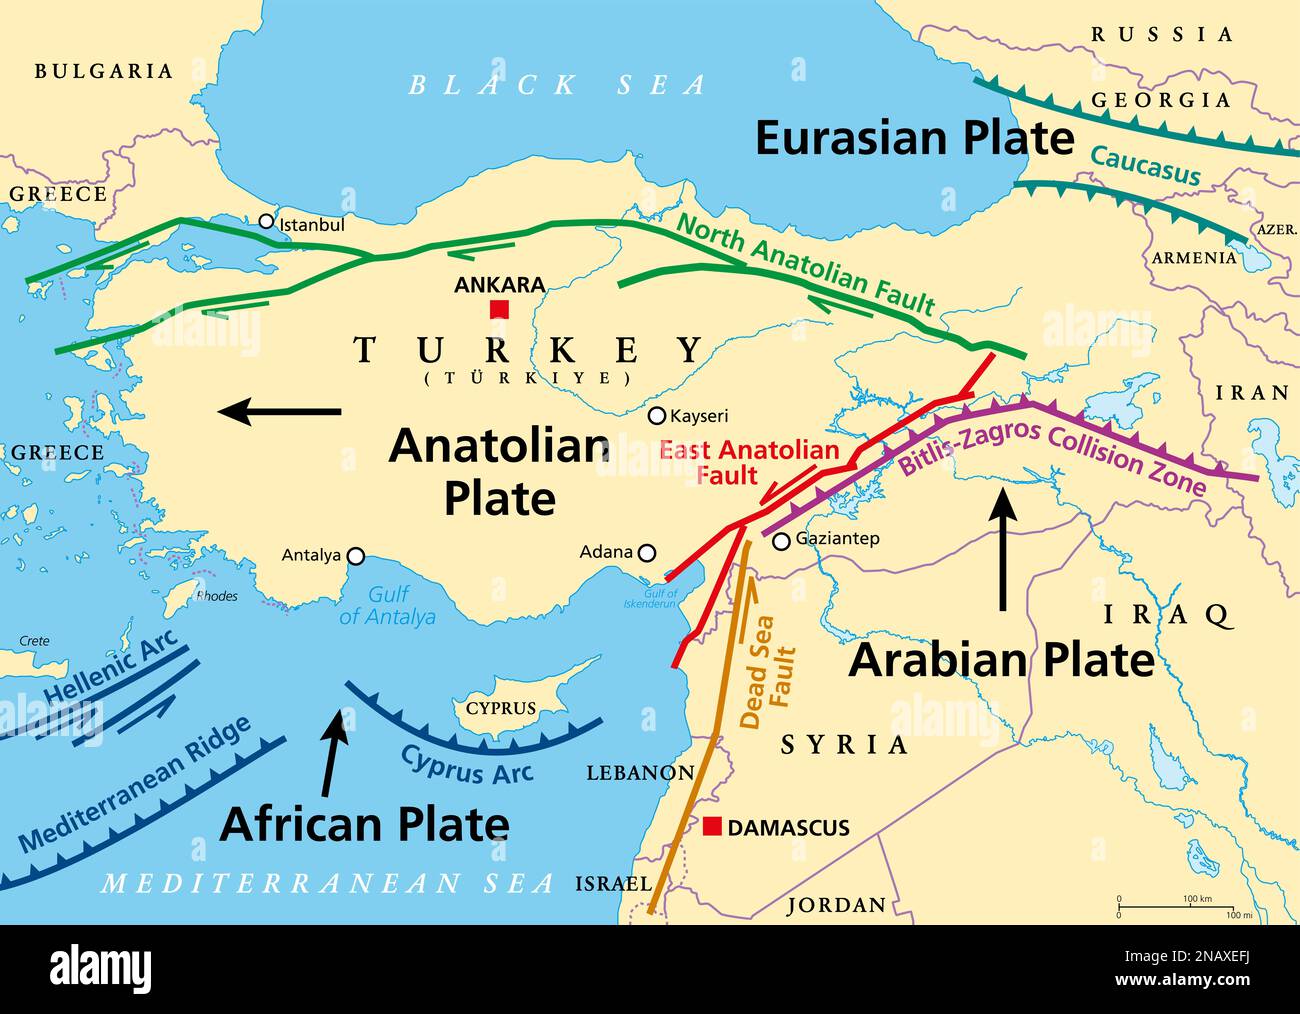 Anatolian Plate tectonics map. Most of the country of Turkey is located on this continental tectonic plate. Stock Photo